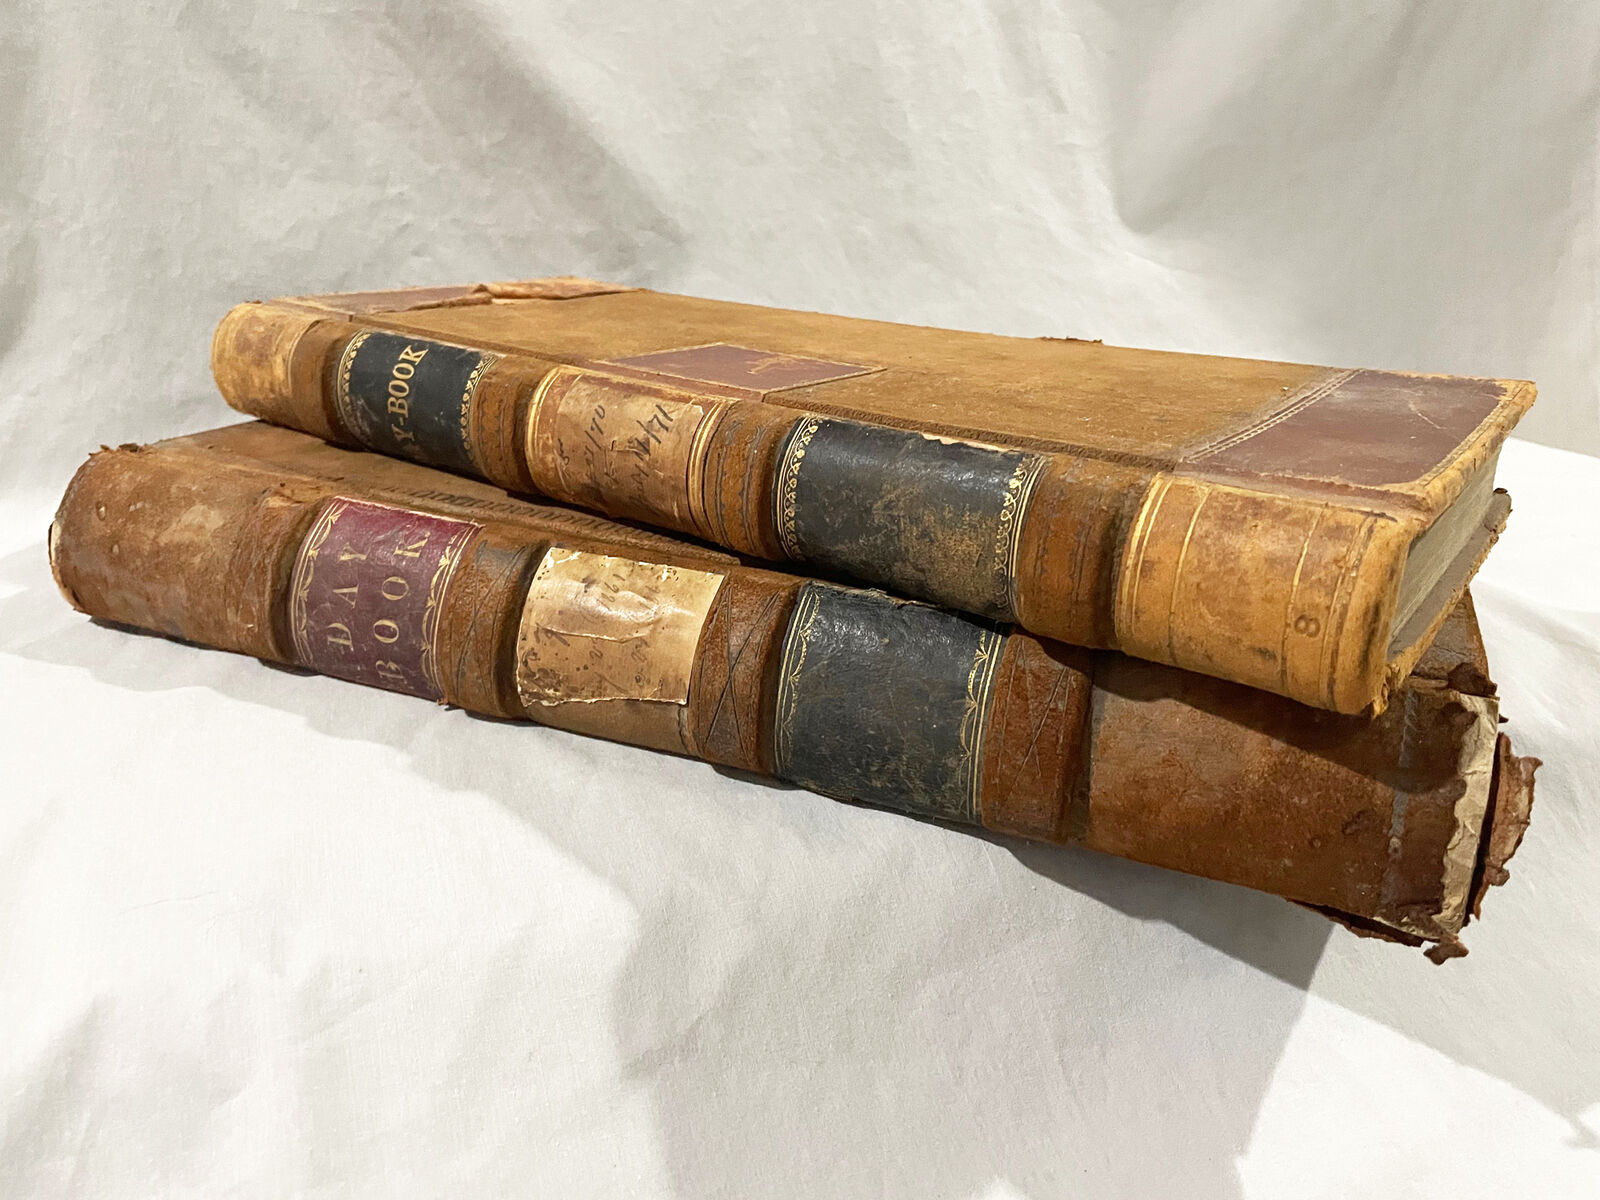 2 Antique LANSING IOWA STORE LEDGERS DAY BOOKS 1860 - 1870s